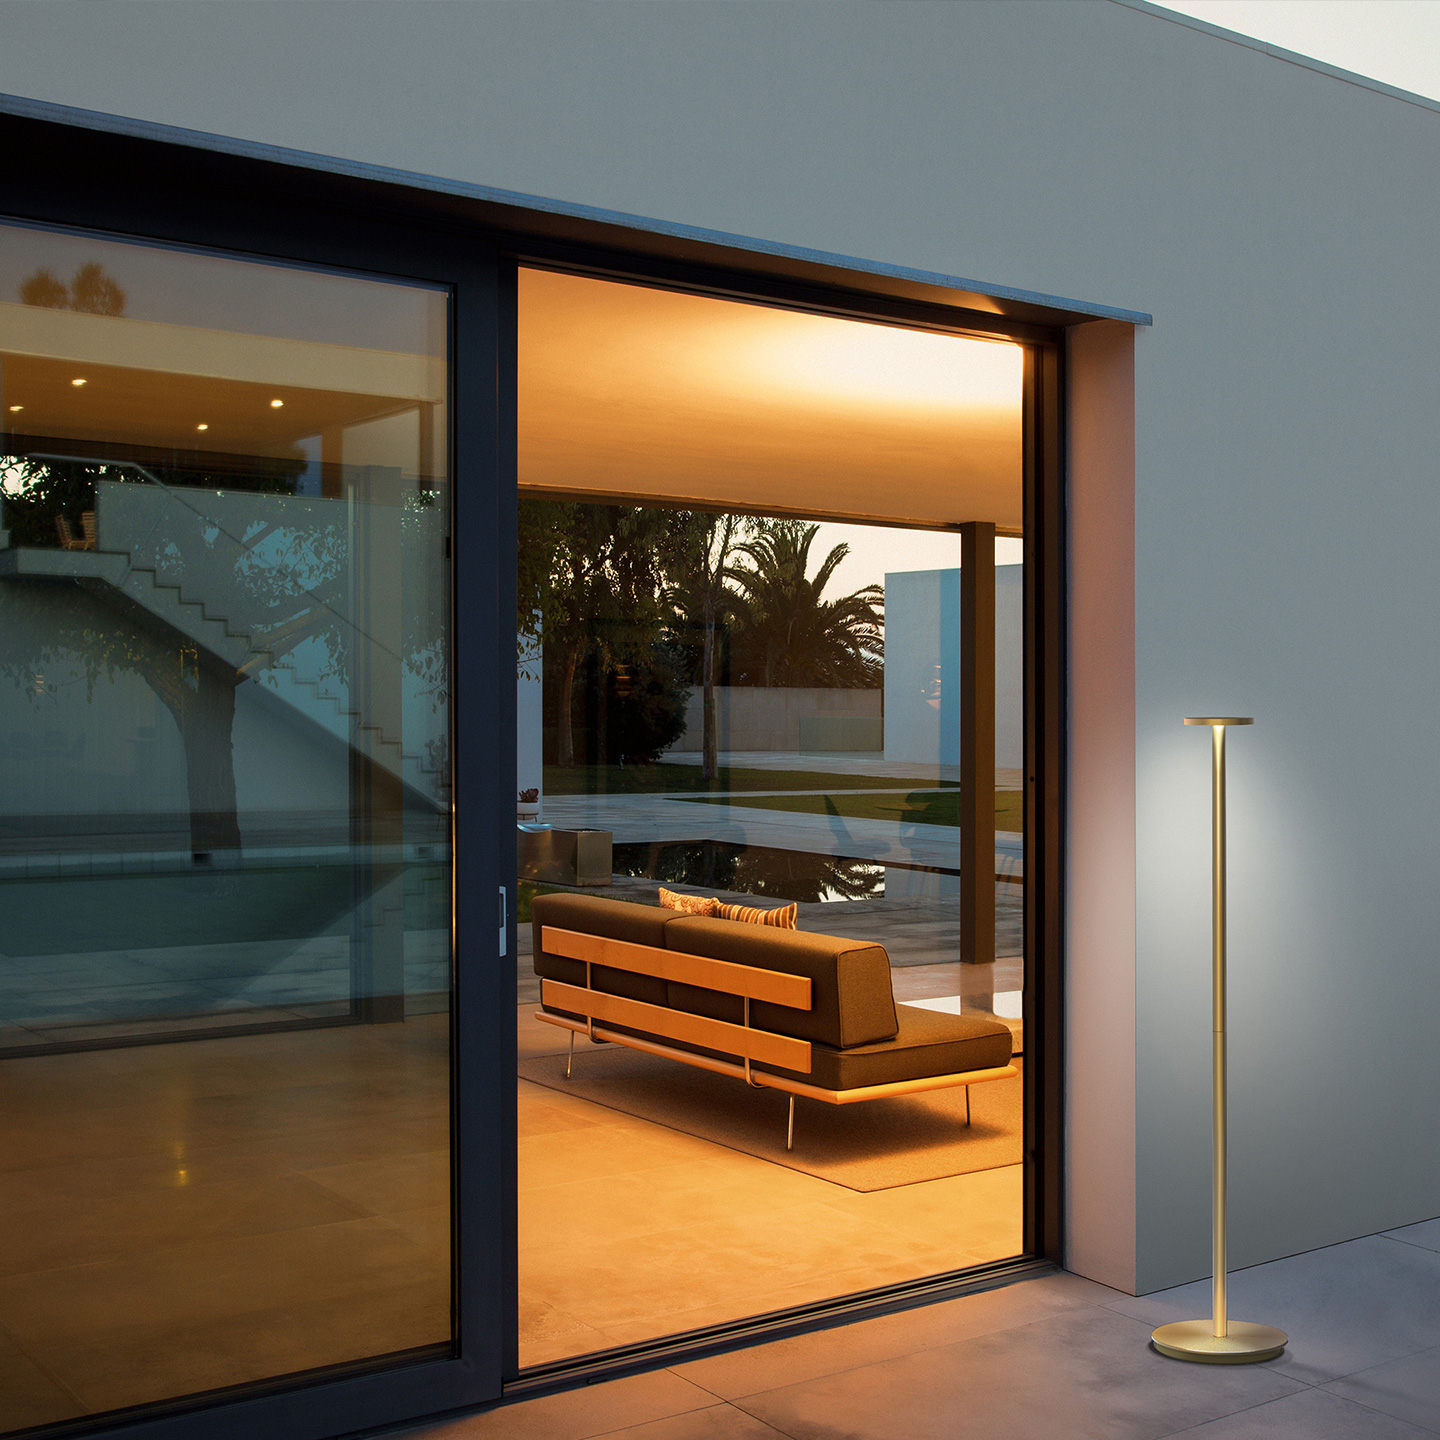 Luci lamp creates a zone of warm-dim illumination that suits all aspects of daily life.